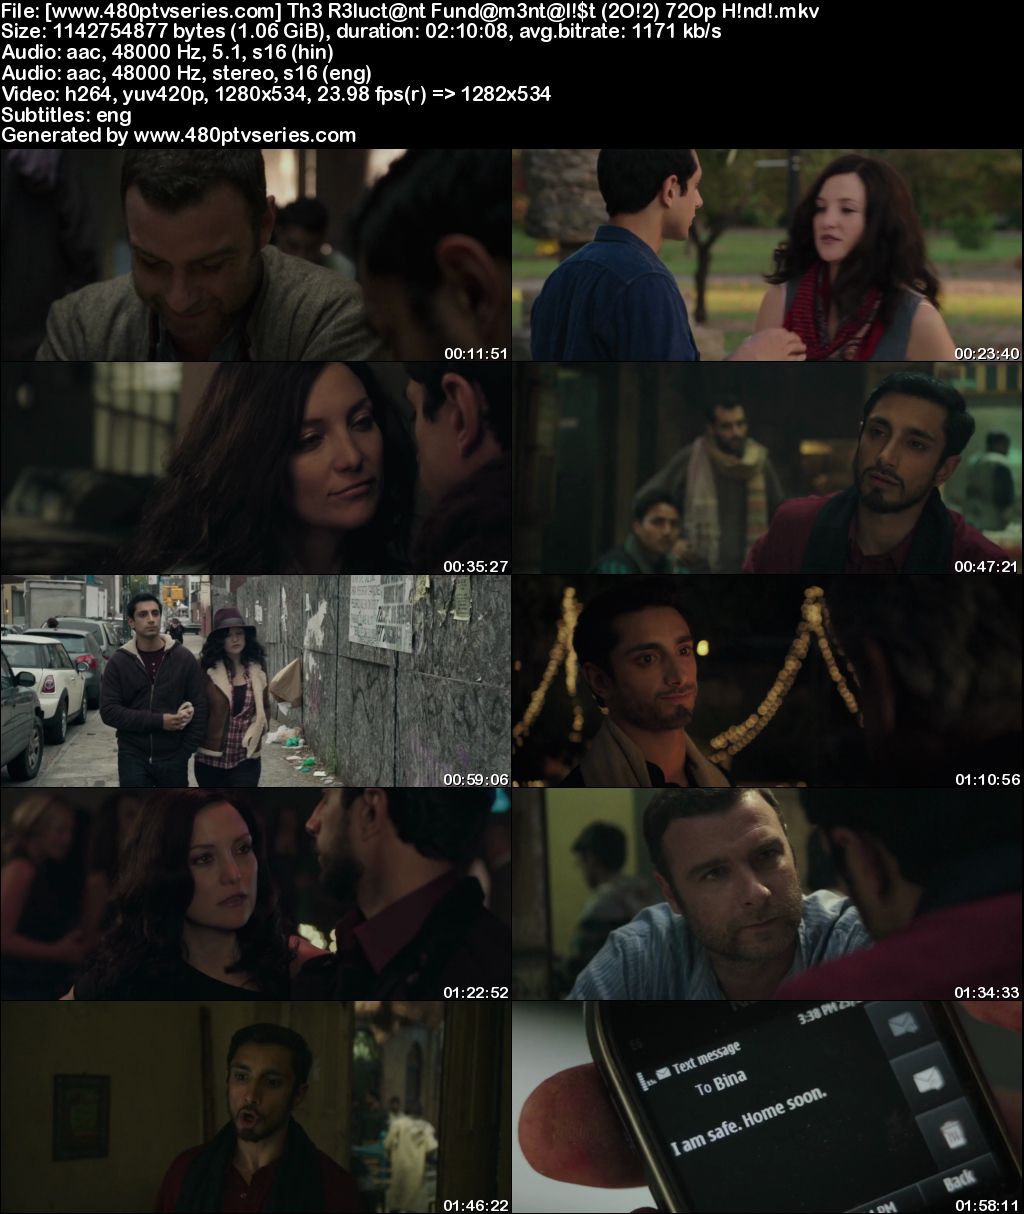 Watch Online Free The Reluctant Fundamentalist (2012) Full Hindi Dual Audio Movie Download 480p 720p Bluray